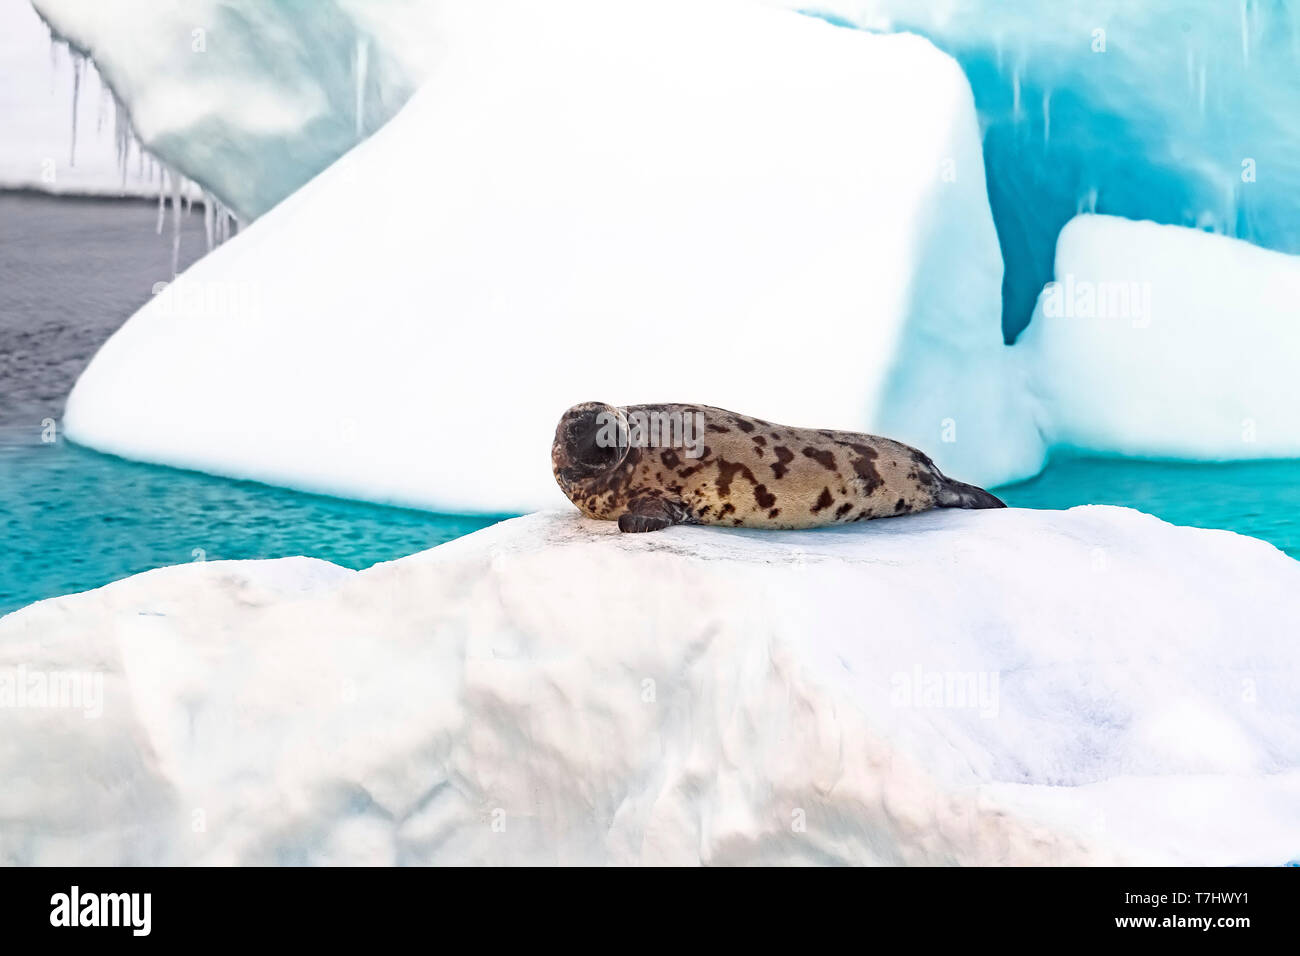 Female Hooded Seal lingered on a ice pack in middle of the Greenland Sea. July 2010. Stock Photo